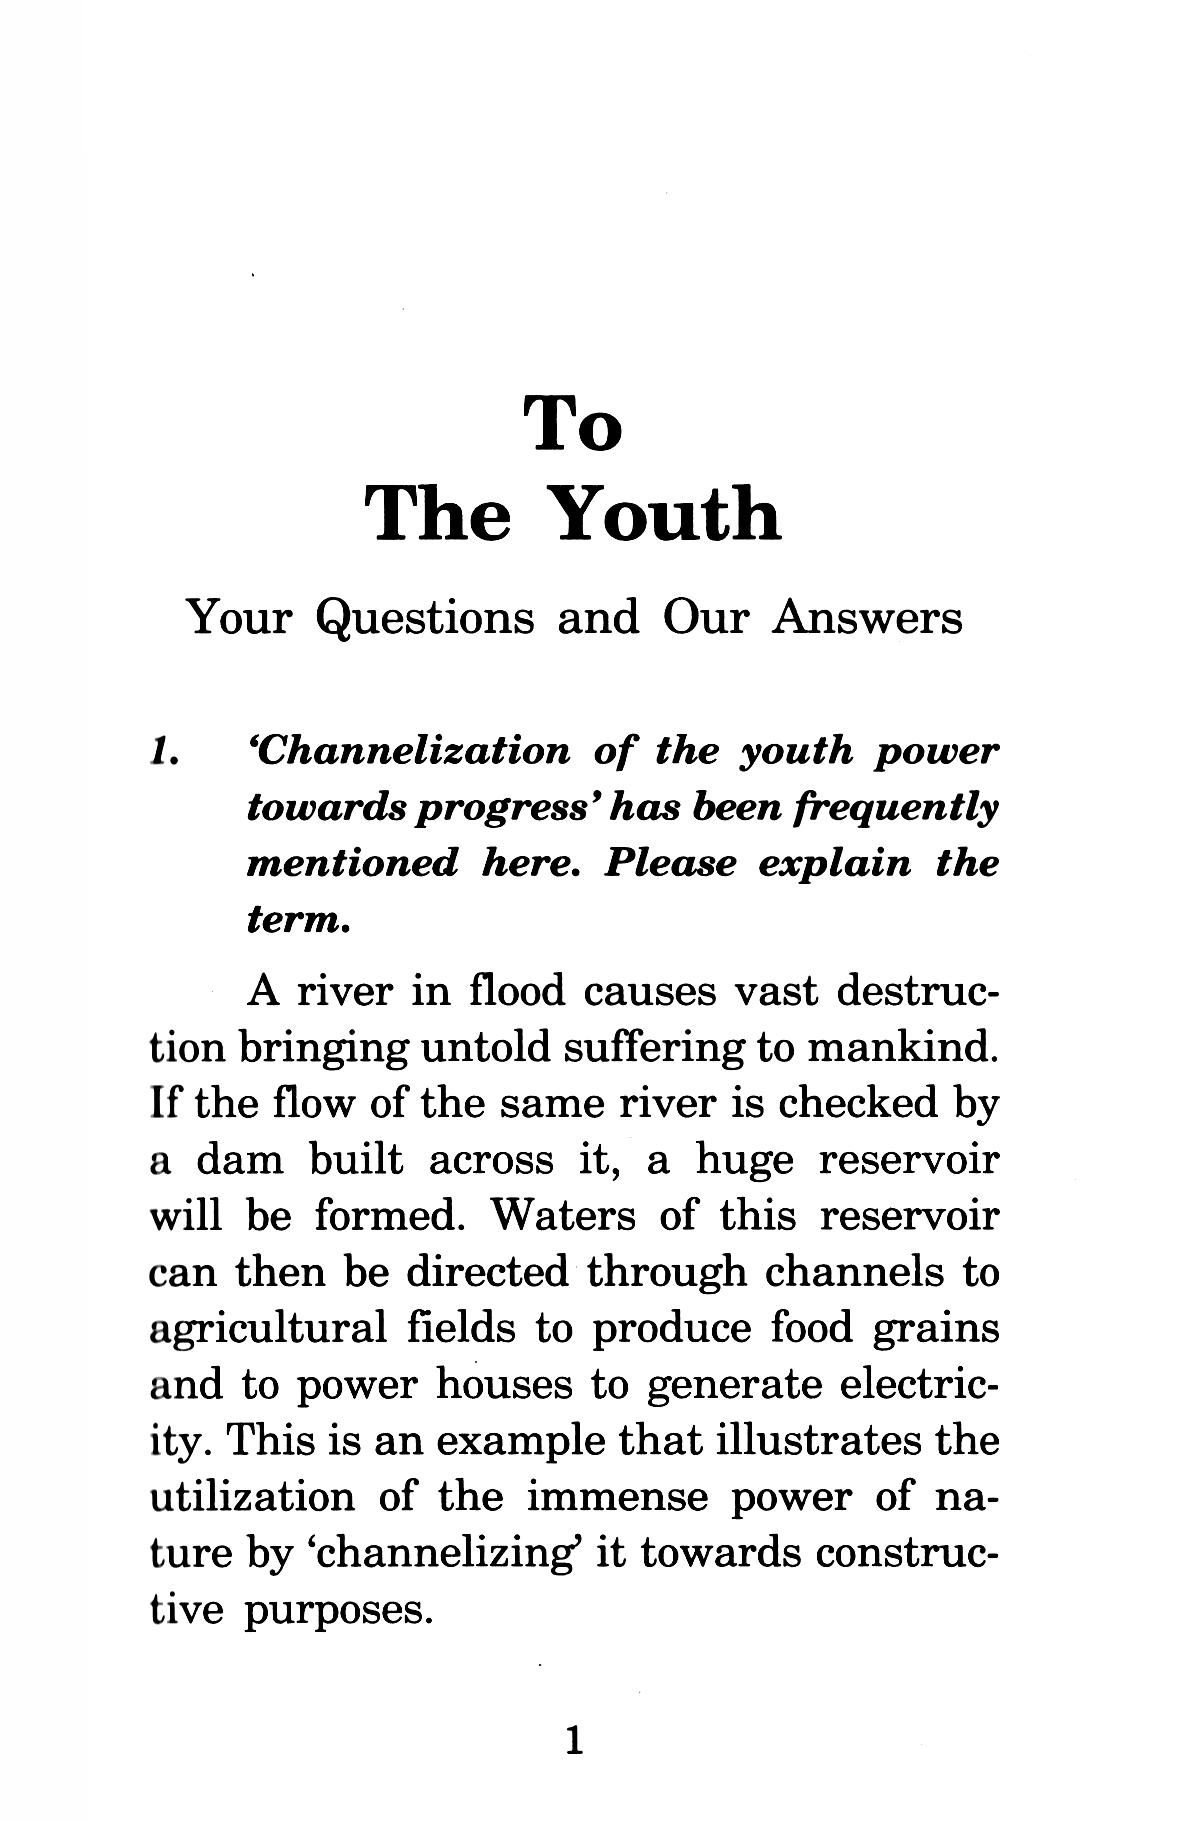 To The Youth